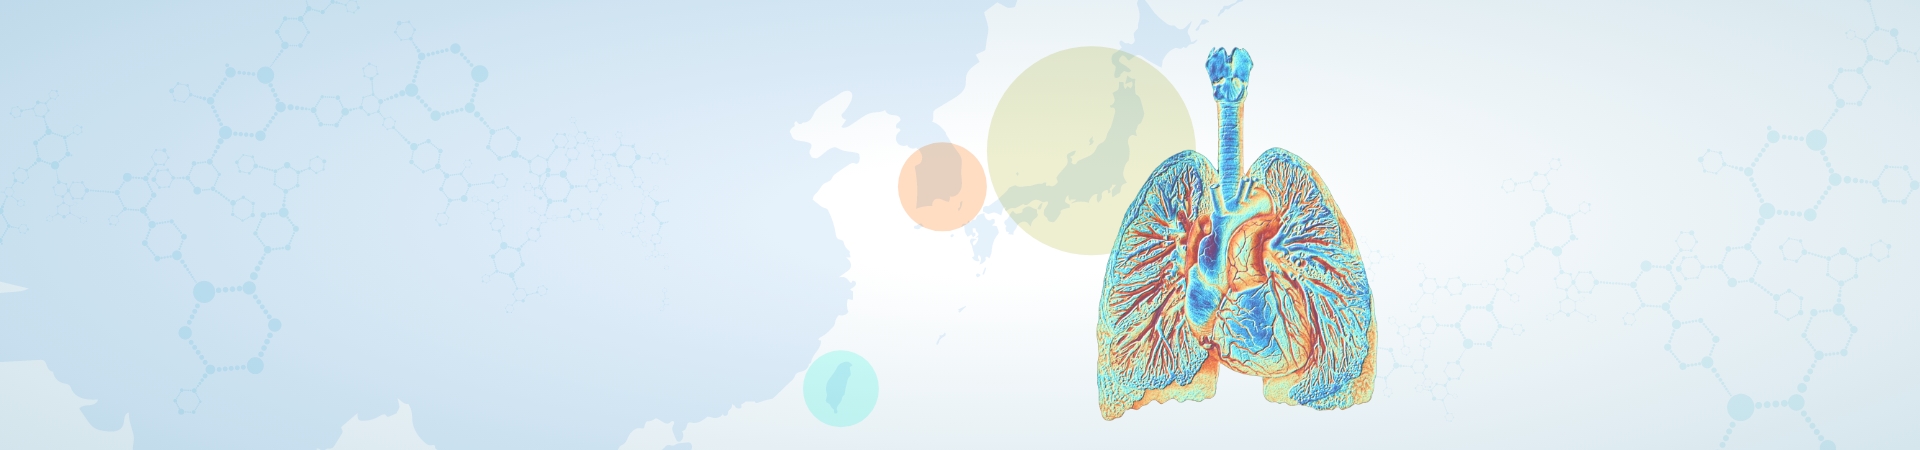 Video | Breathing in a new era: a comparative analysis of lung cancer policies in Japan, South Korea and Taiwan [Video]